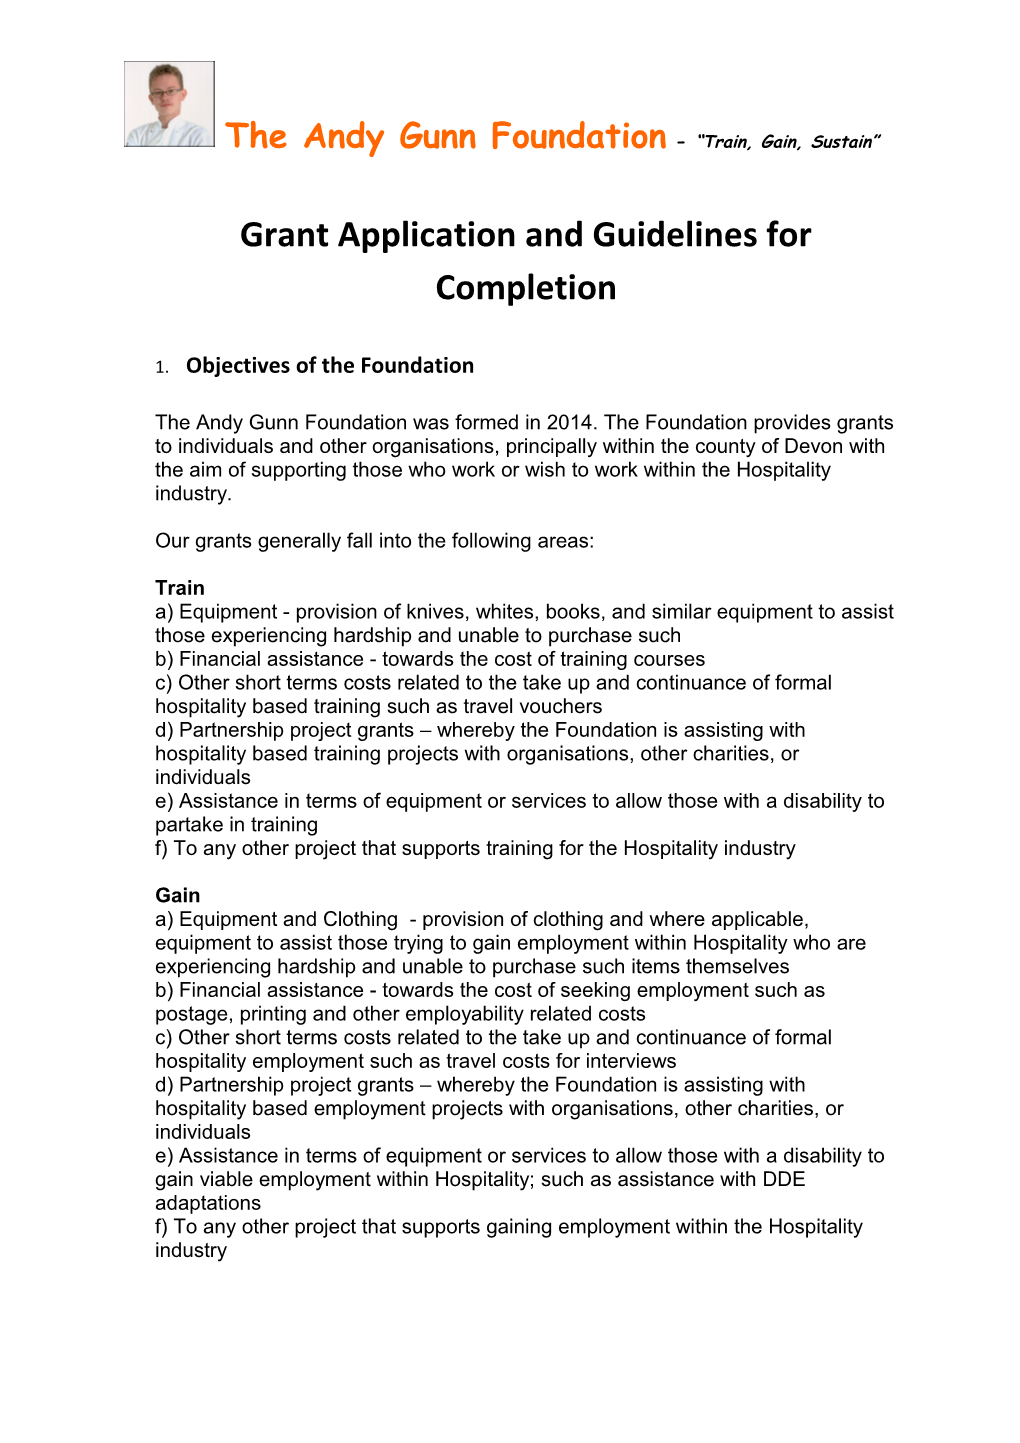 Grant Application and Guidelines for Completion